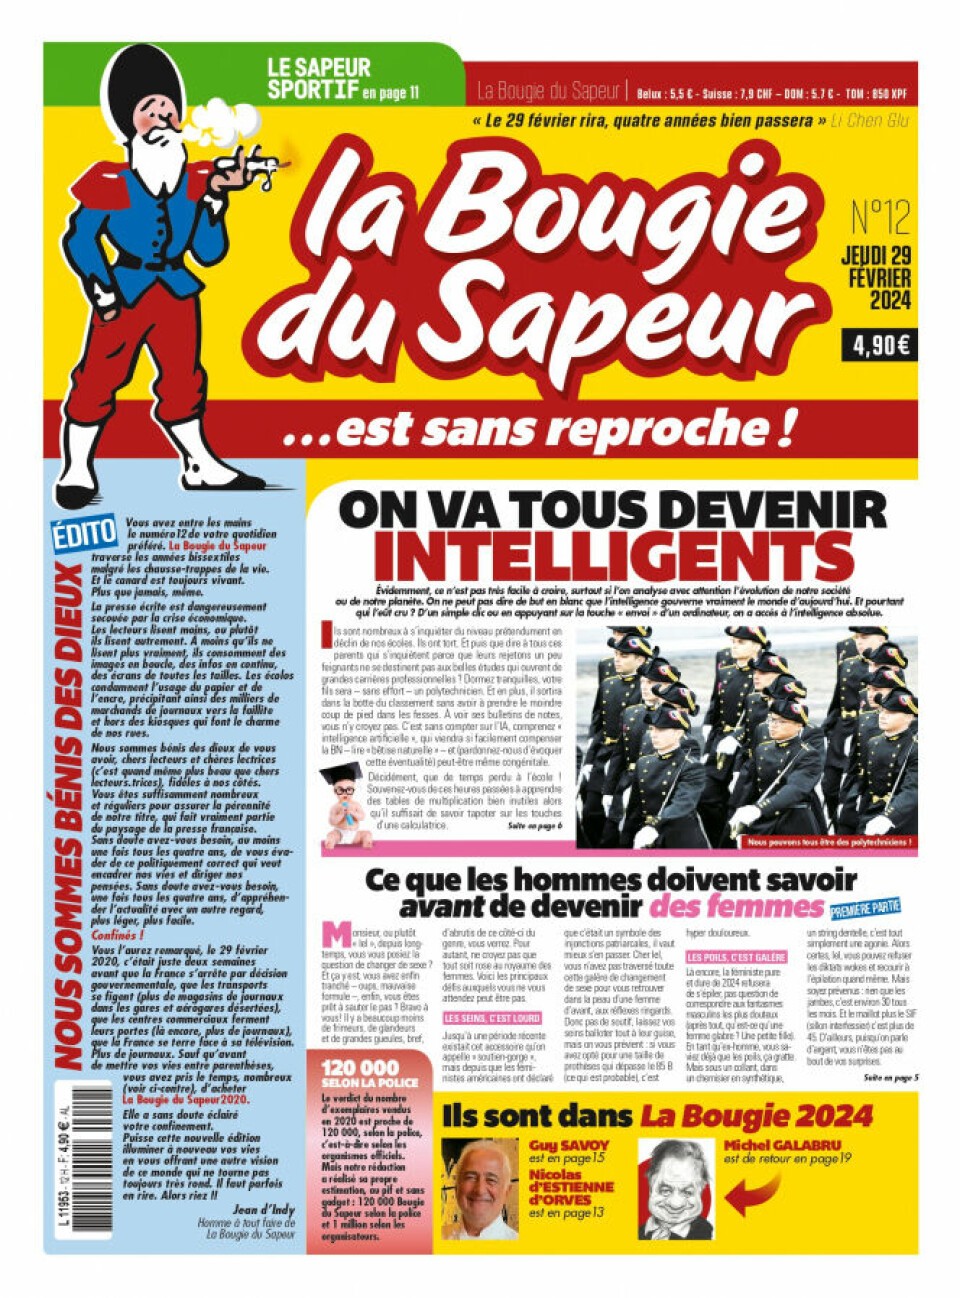 The cover of this year’s edition of La Bougie du Sapeur